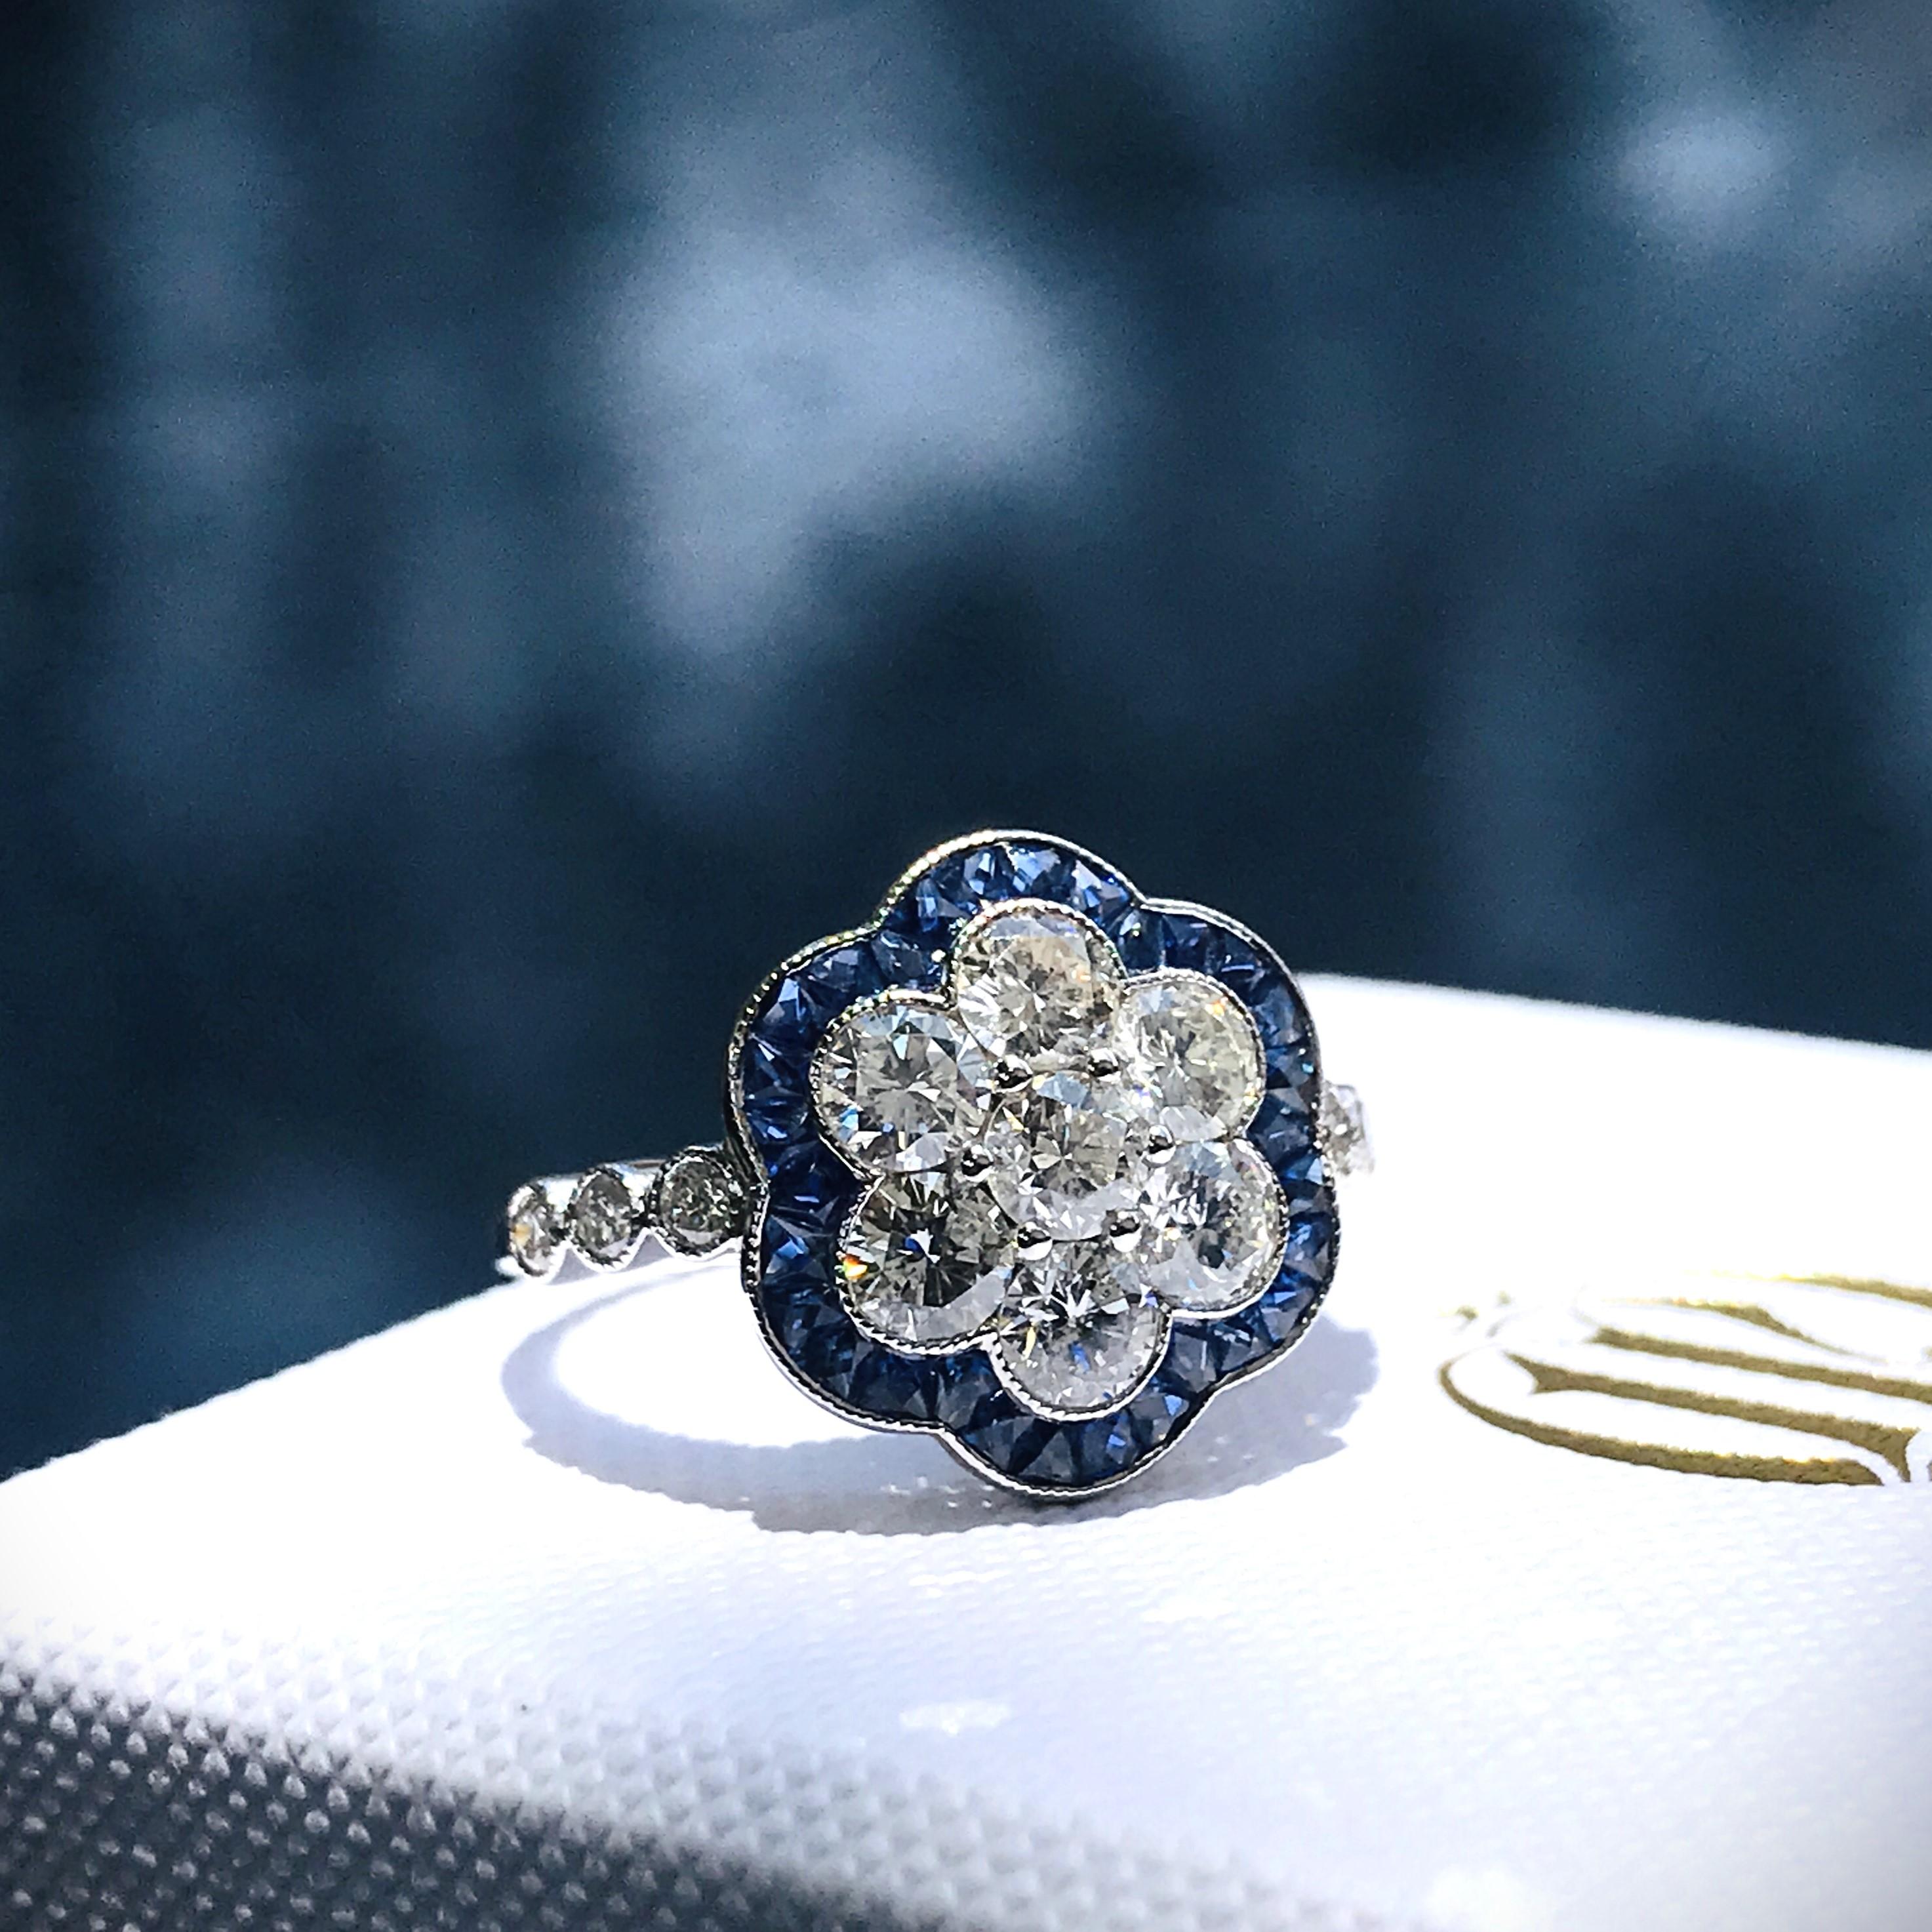 Artistry and sophistication come together in a flower ring with sapphires and diamonds from the Art Deco inspiration. The ring features a round shape center diamond on it surrounded by French Cut Sapphires, round brilliant diamonds on shoulders add